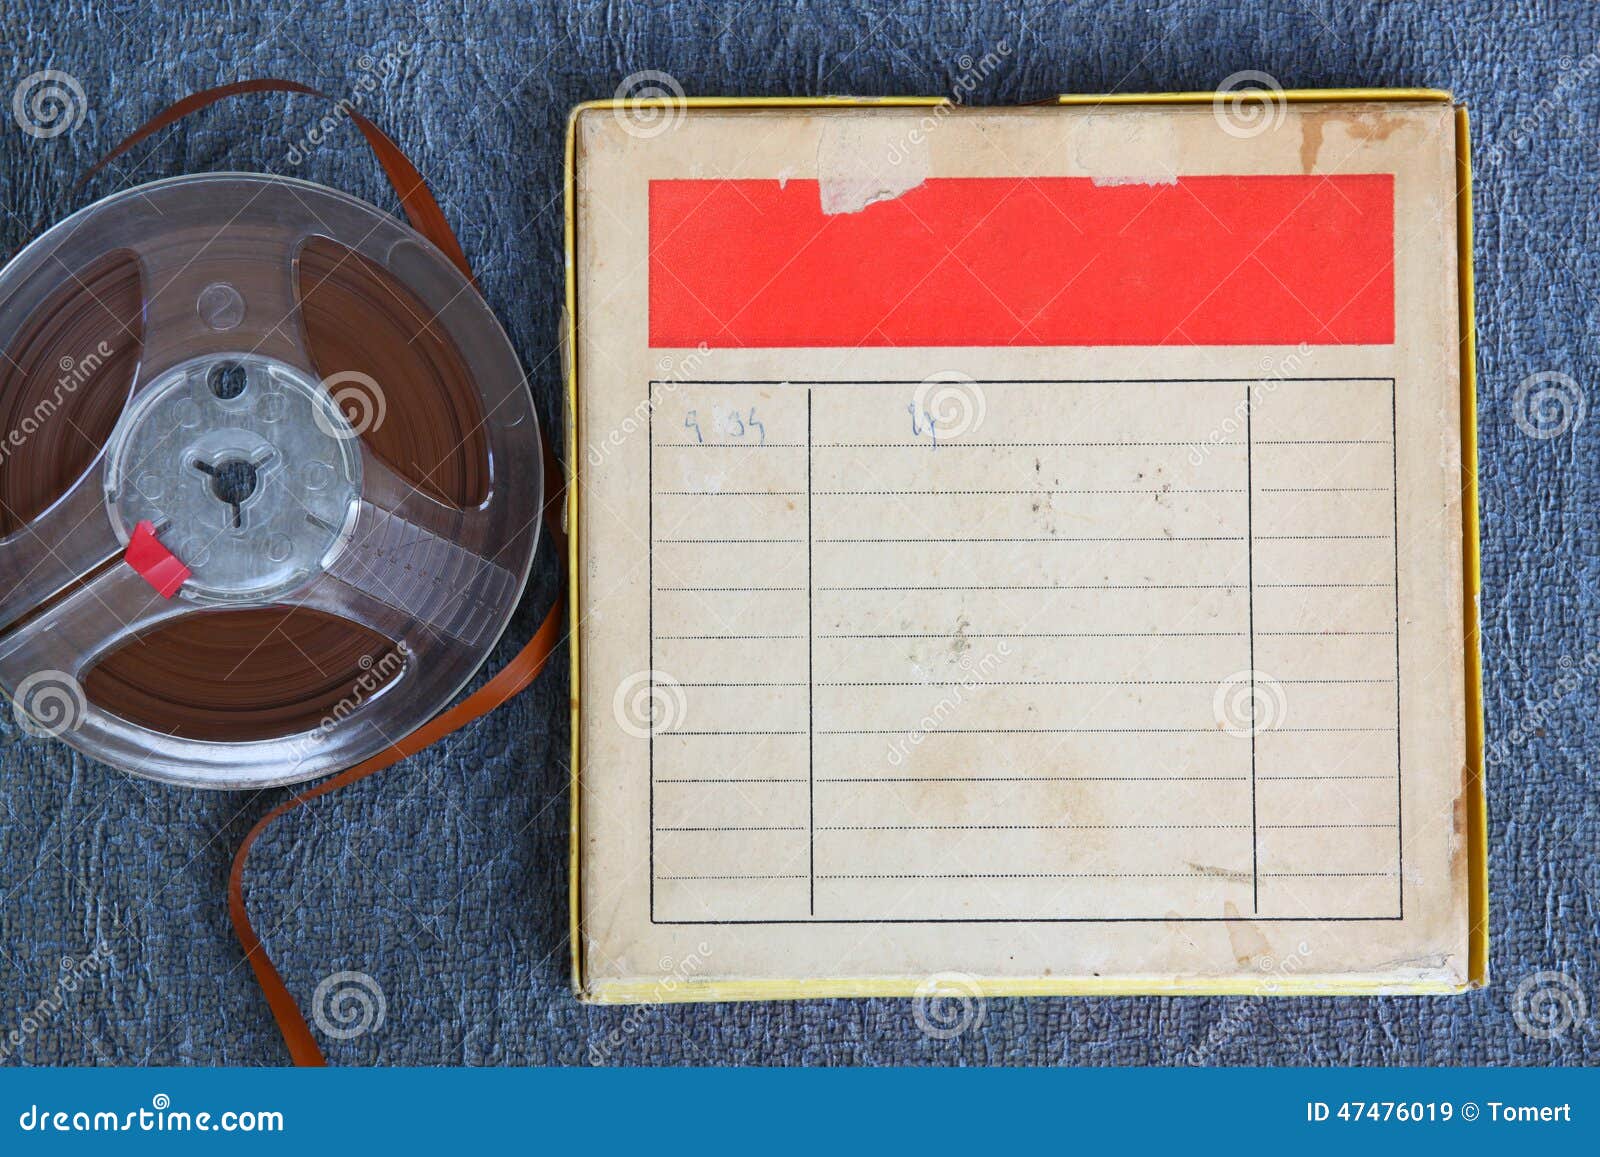 Top View of Old Sound Recording Tape, Reel To Reel Type and Box